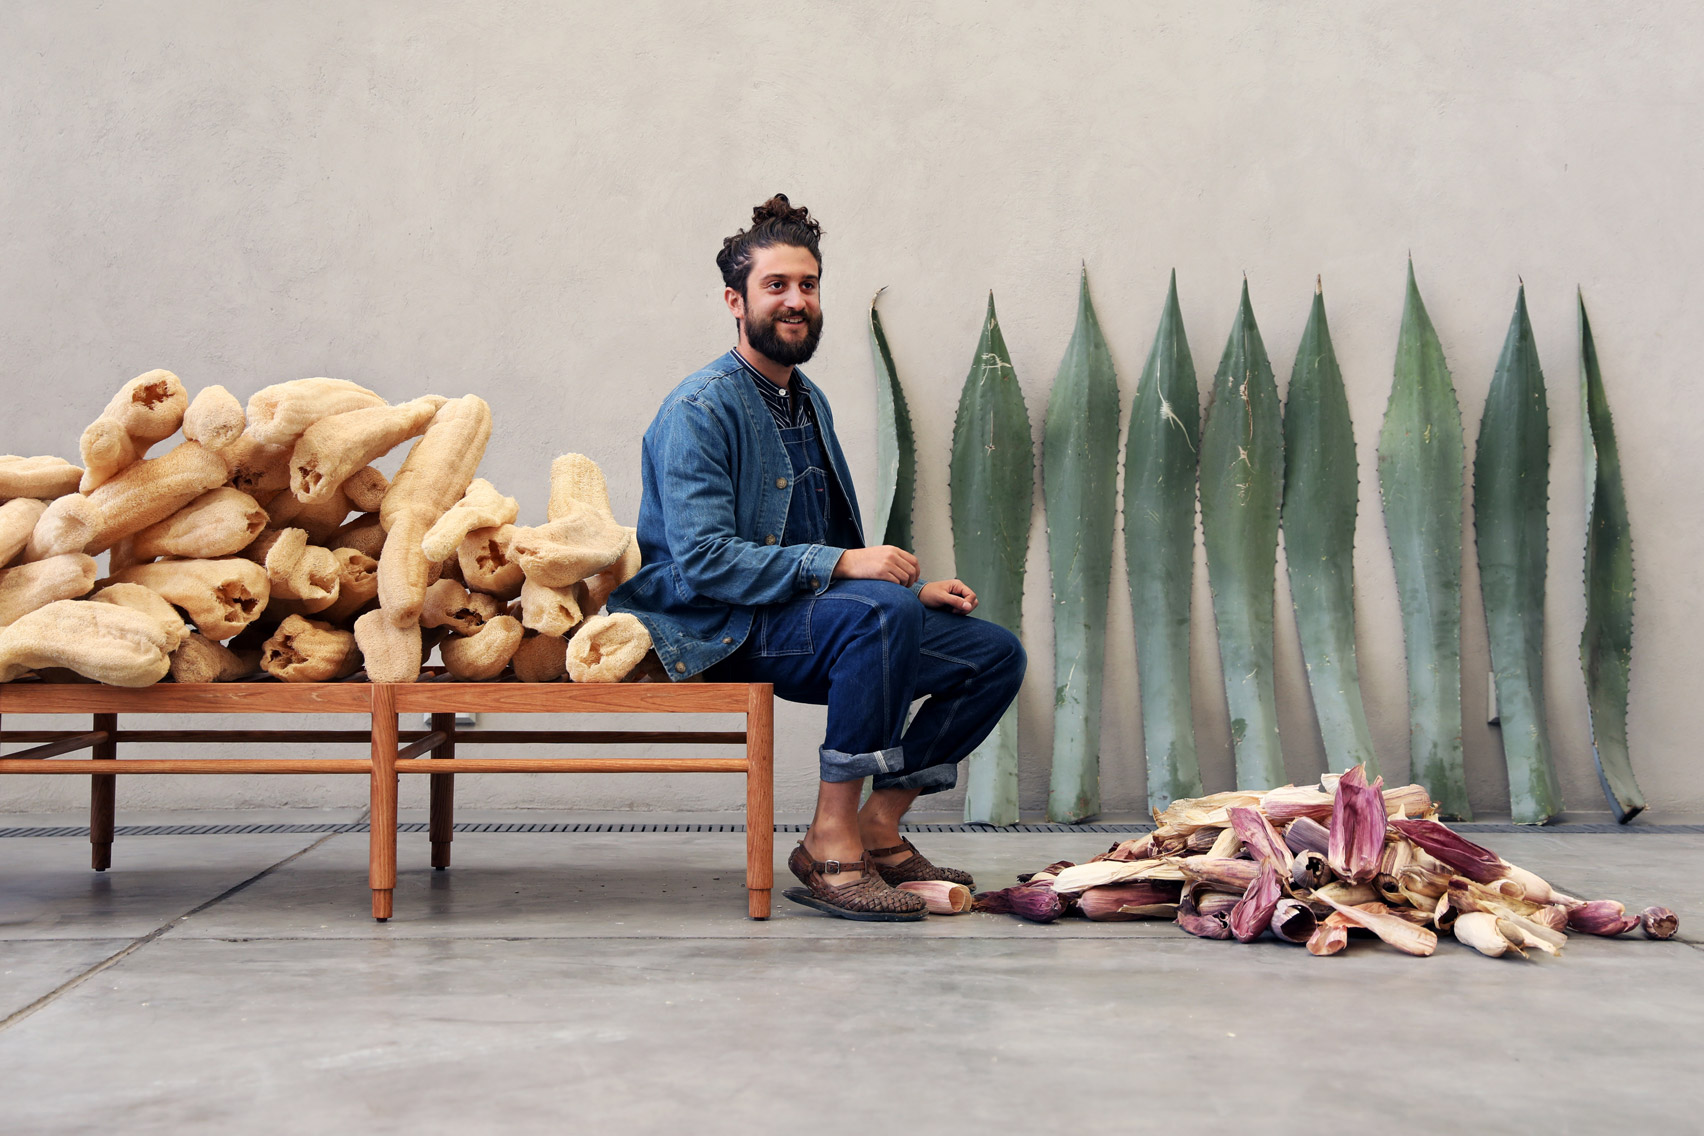 Mexican designer Fernando Laposse has developed Totomoxtle, a veneer material that uses the colourful husks of heirloom corn species and restores vital biodiversity.